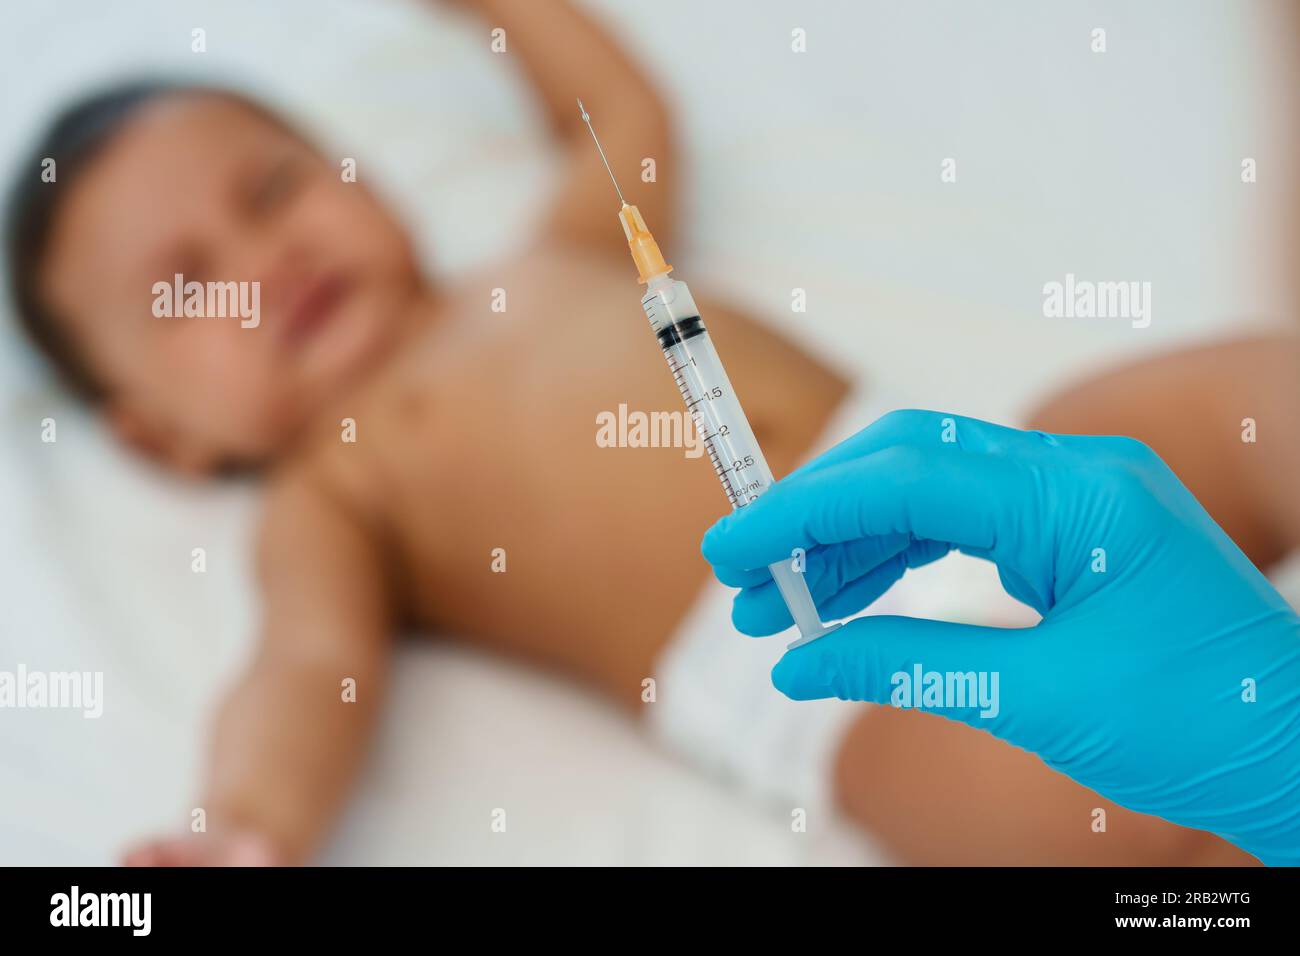 doctor holding syringe and preparing vaccine giving injection to crying infant baby Stock Photo